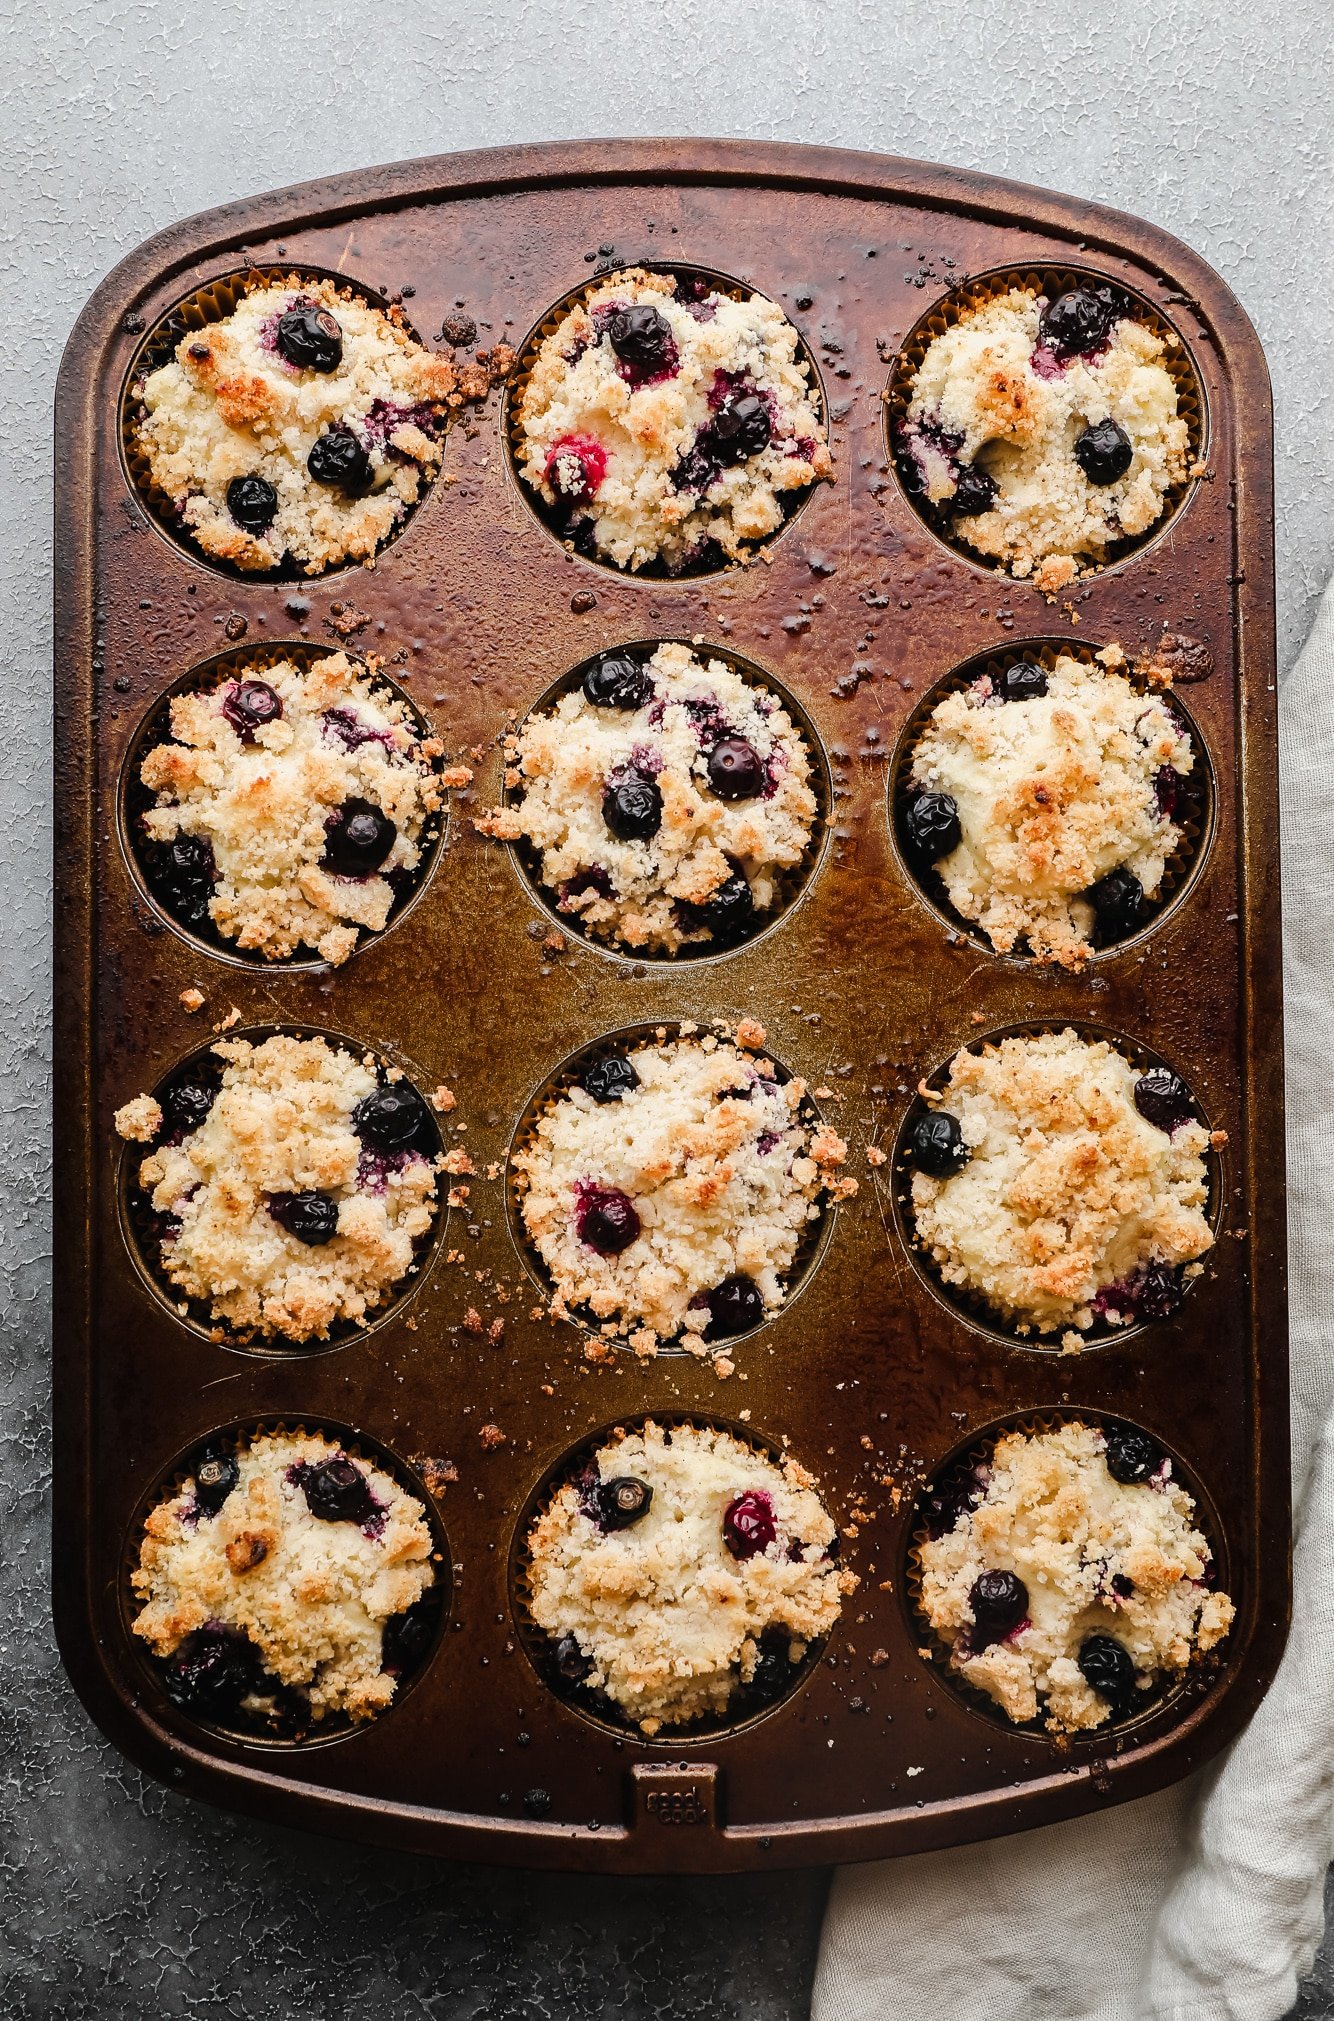 baked gluten free blueberry muffins in a muffin pan.